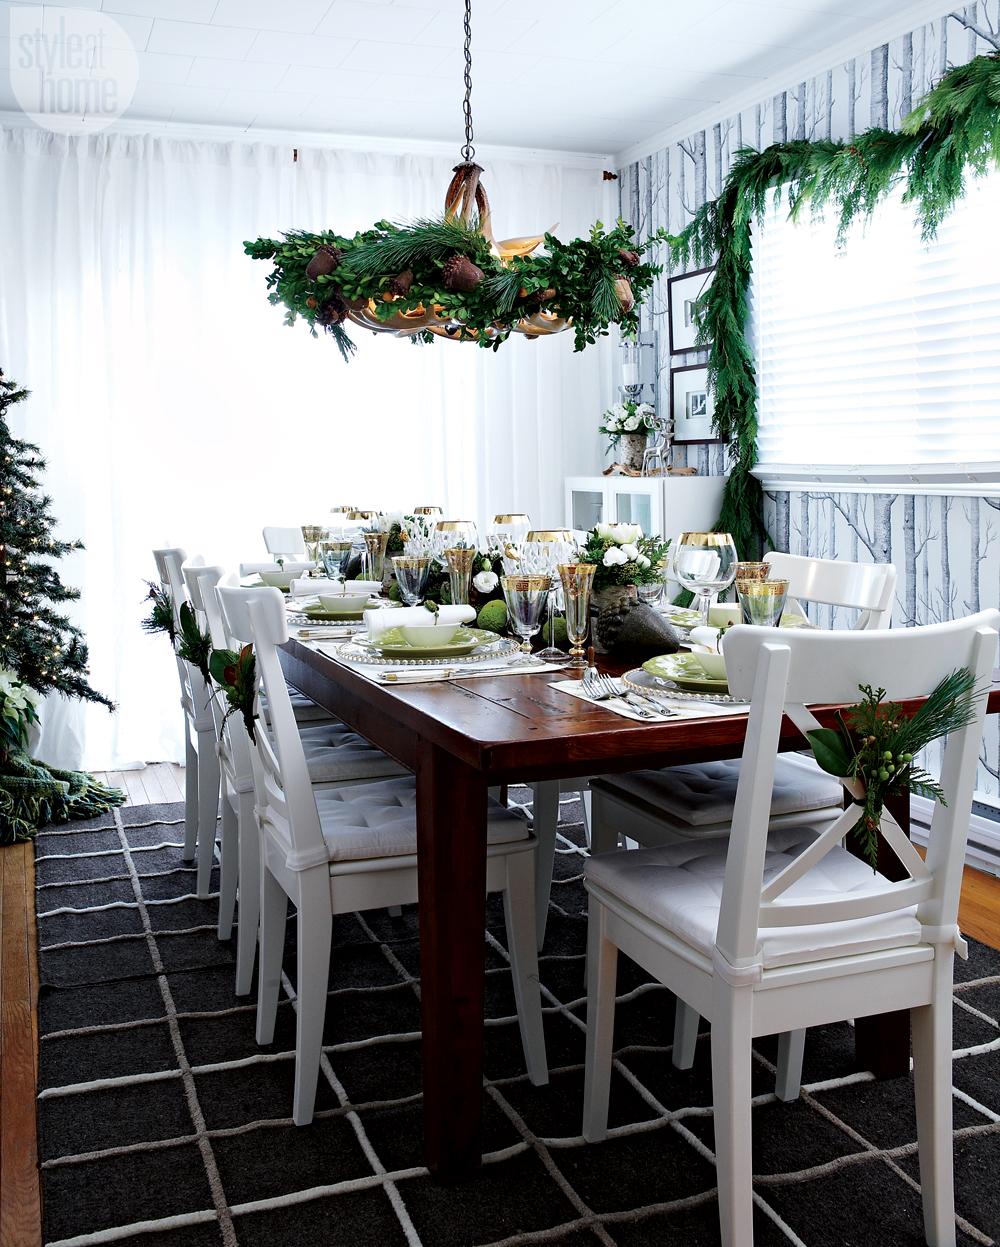 Christmas tree and garland in the dining room. (Photo: Style at Home)